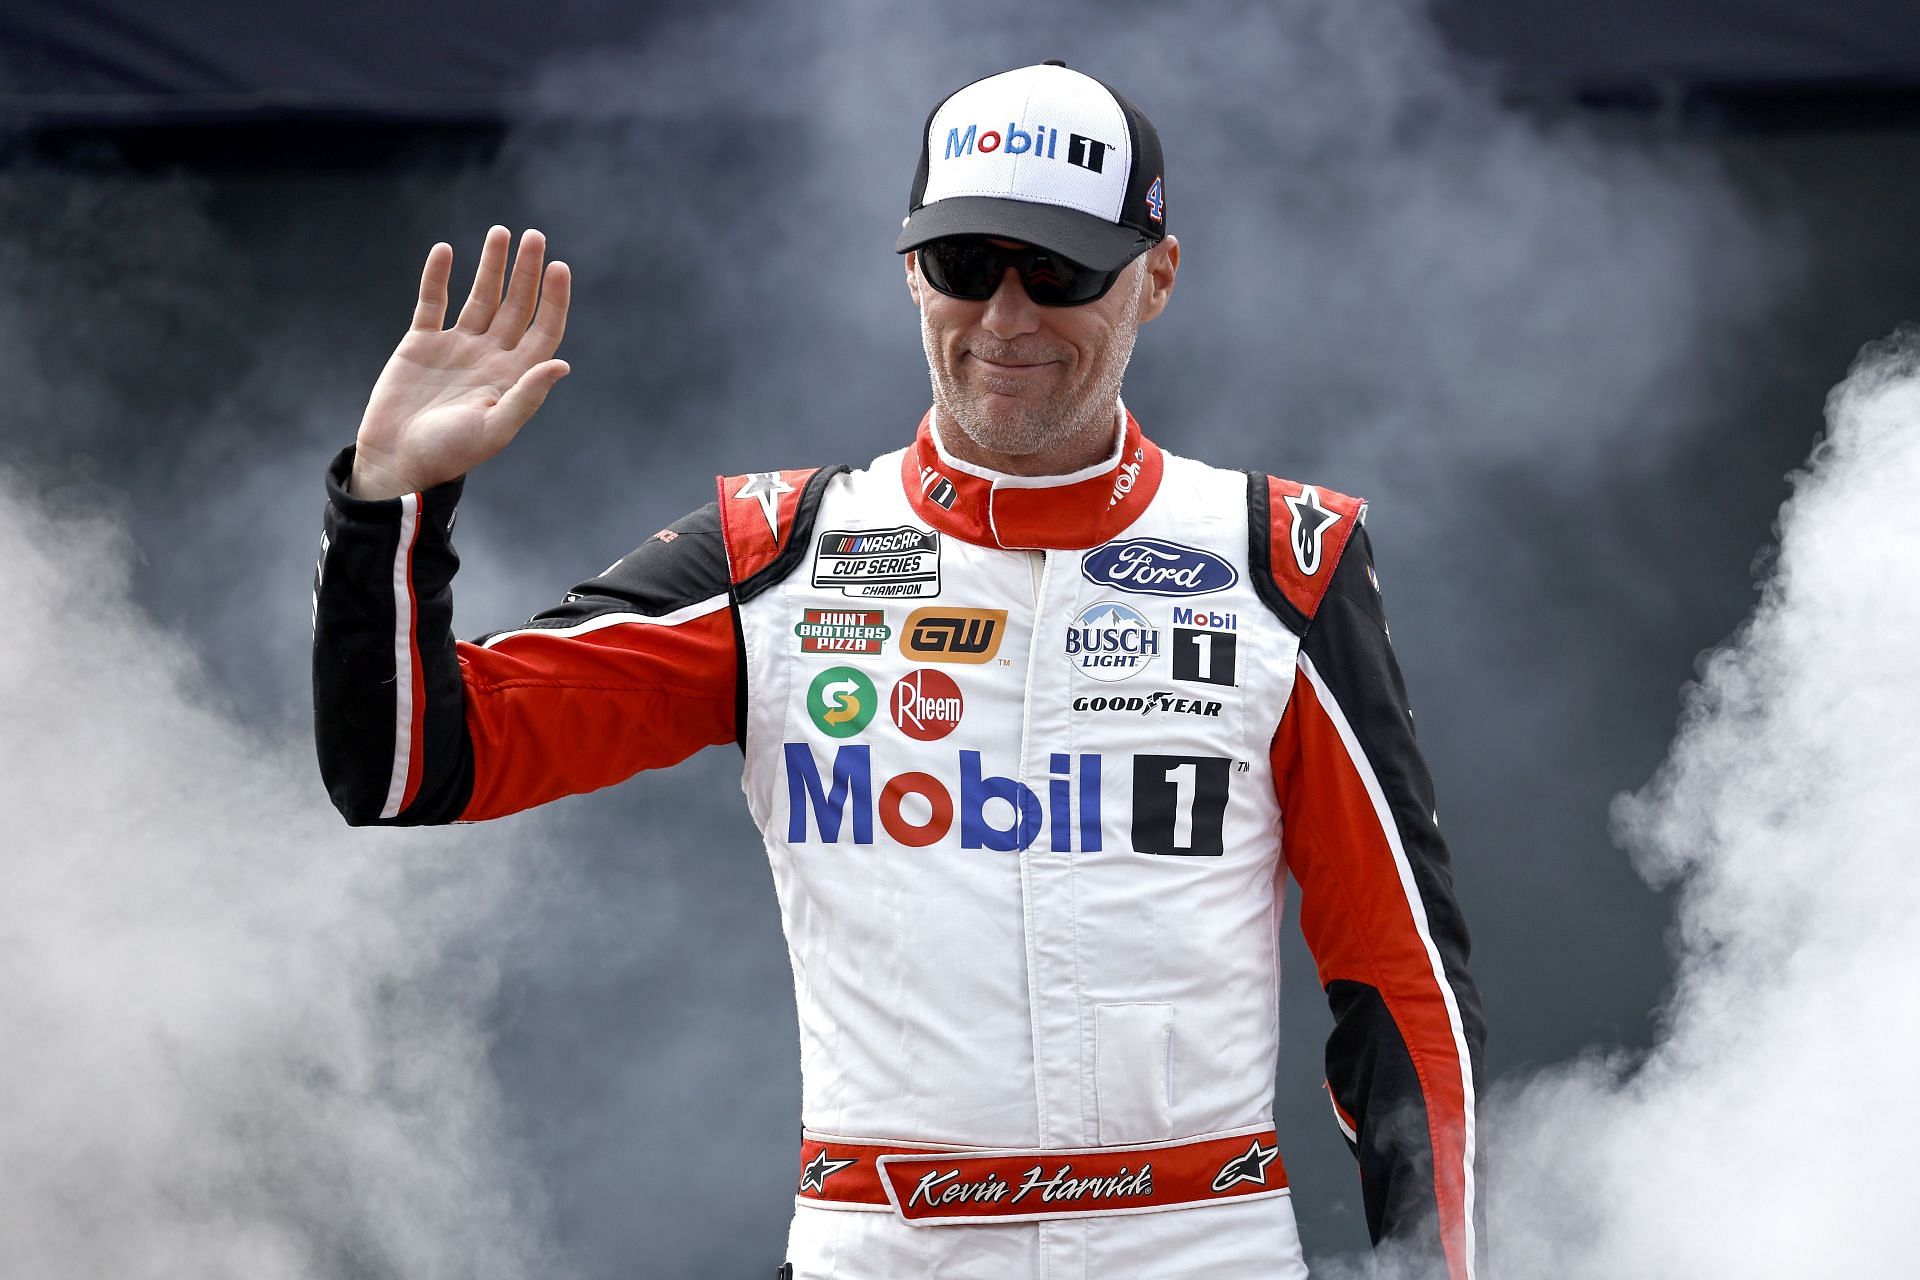 Kevin Harvick waves to fans as he walks onstage during driver intros before the NASCAR Cup Series Federated Auto Parts 400 at Richmond Raceway